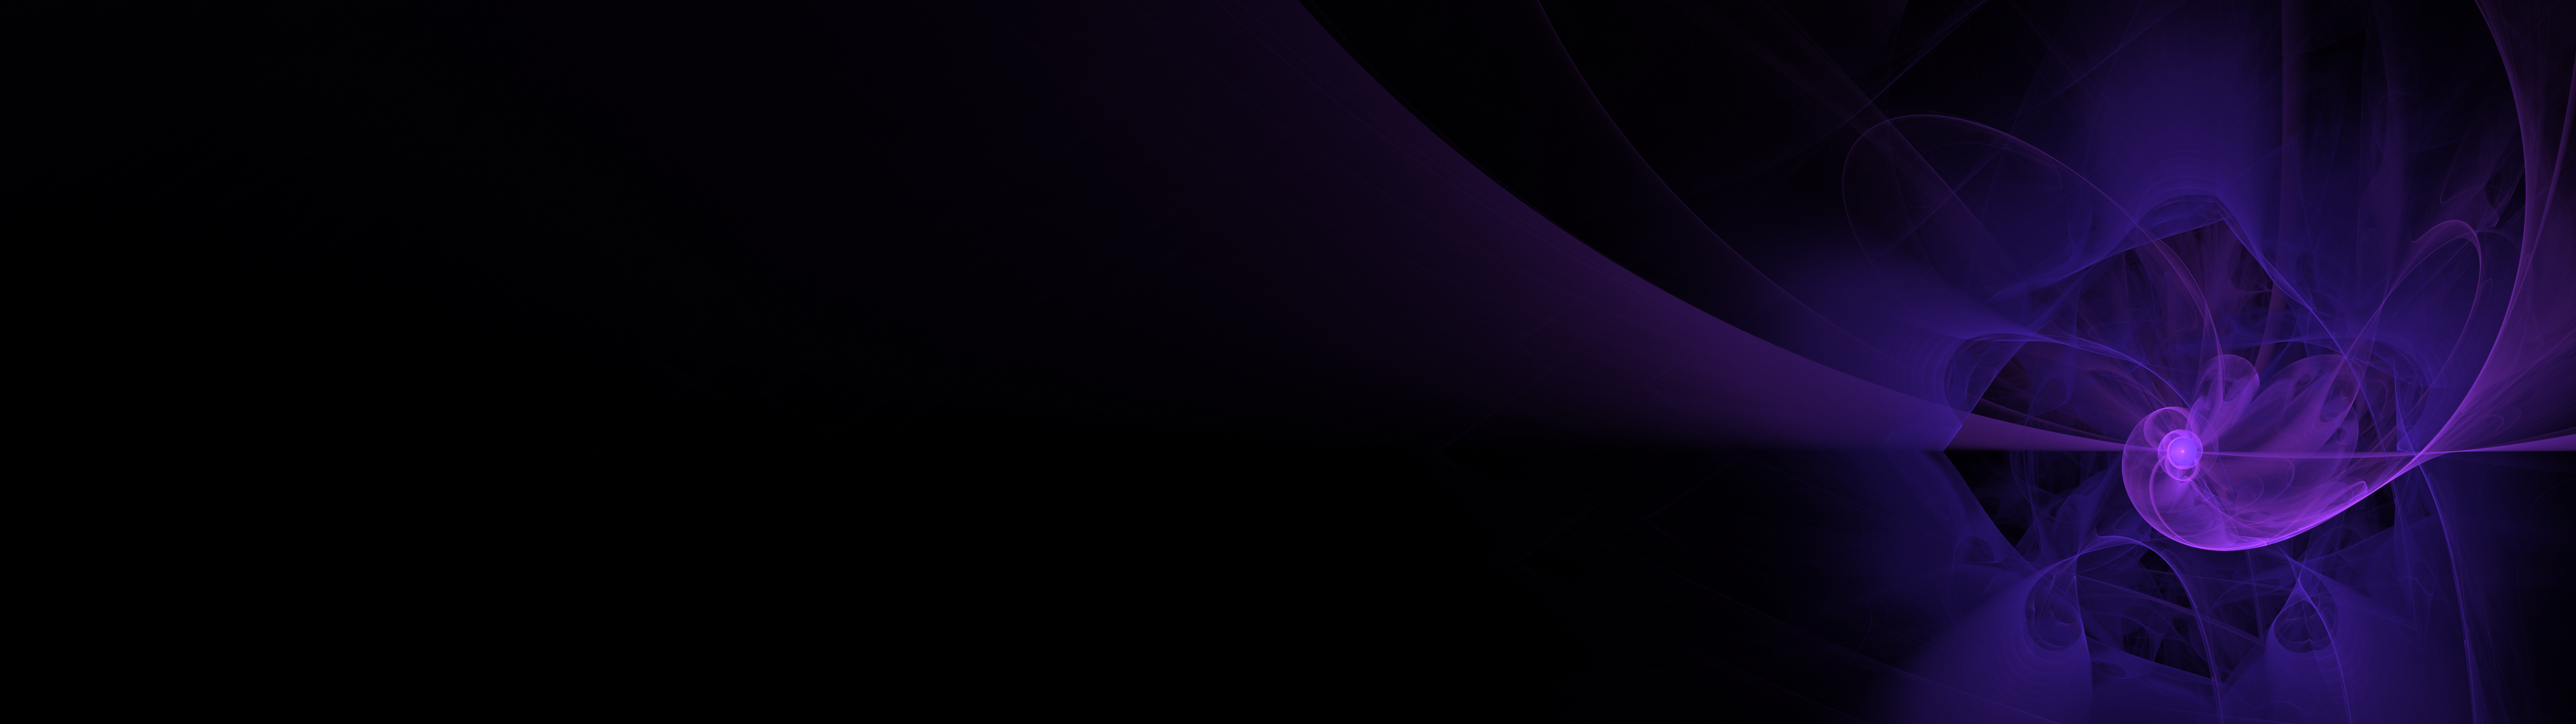 dark fractal purple waves wallpaper wallpapers and images   wallpapers 3840x1080